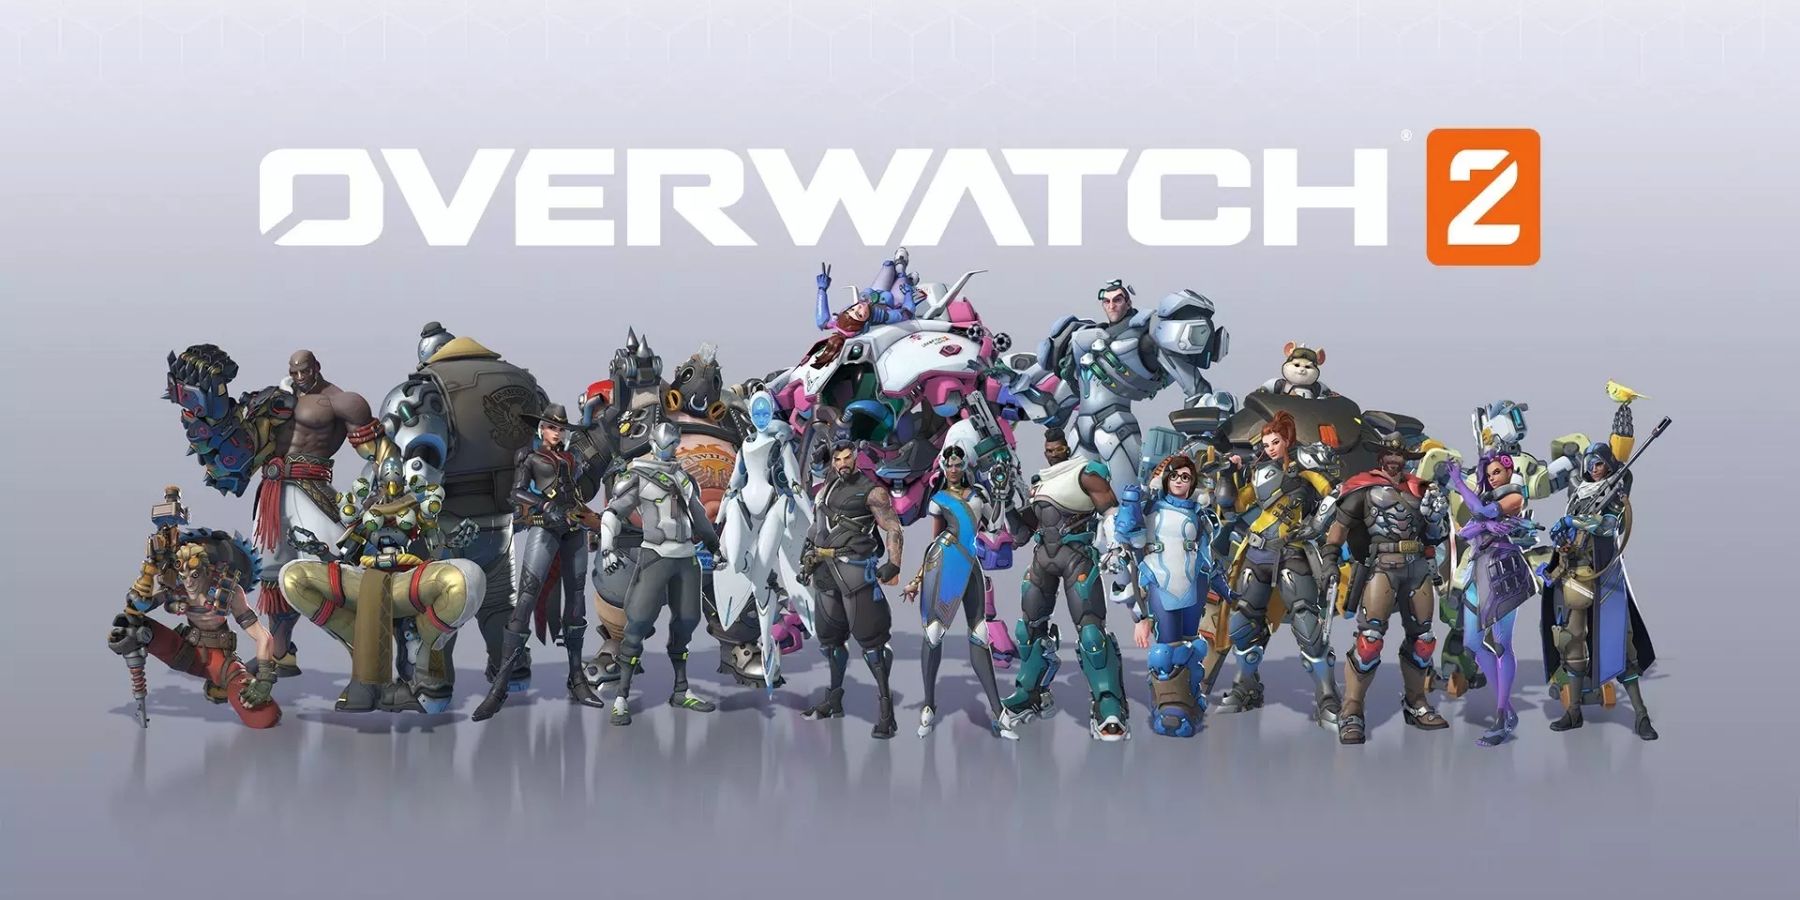 amazon-prime-gaming-members-can-get-a-free-overwatch-2-skin-for-a-limited-time